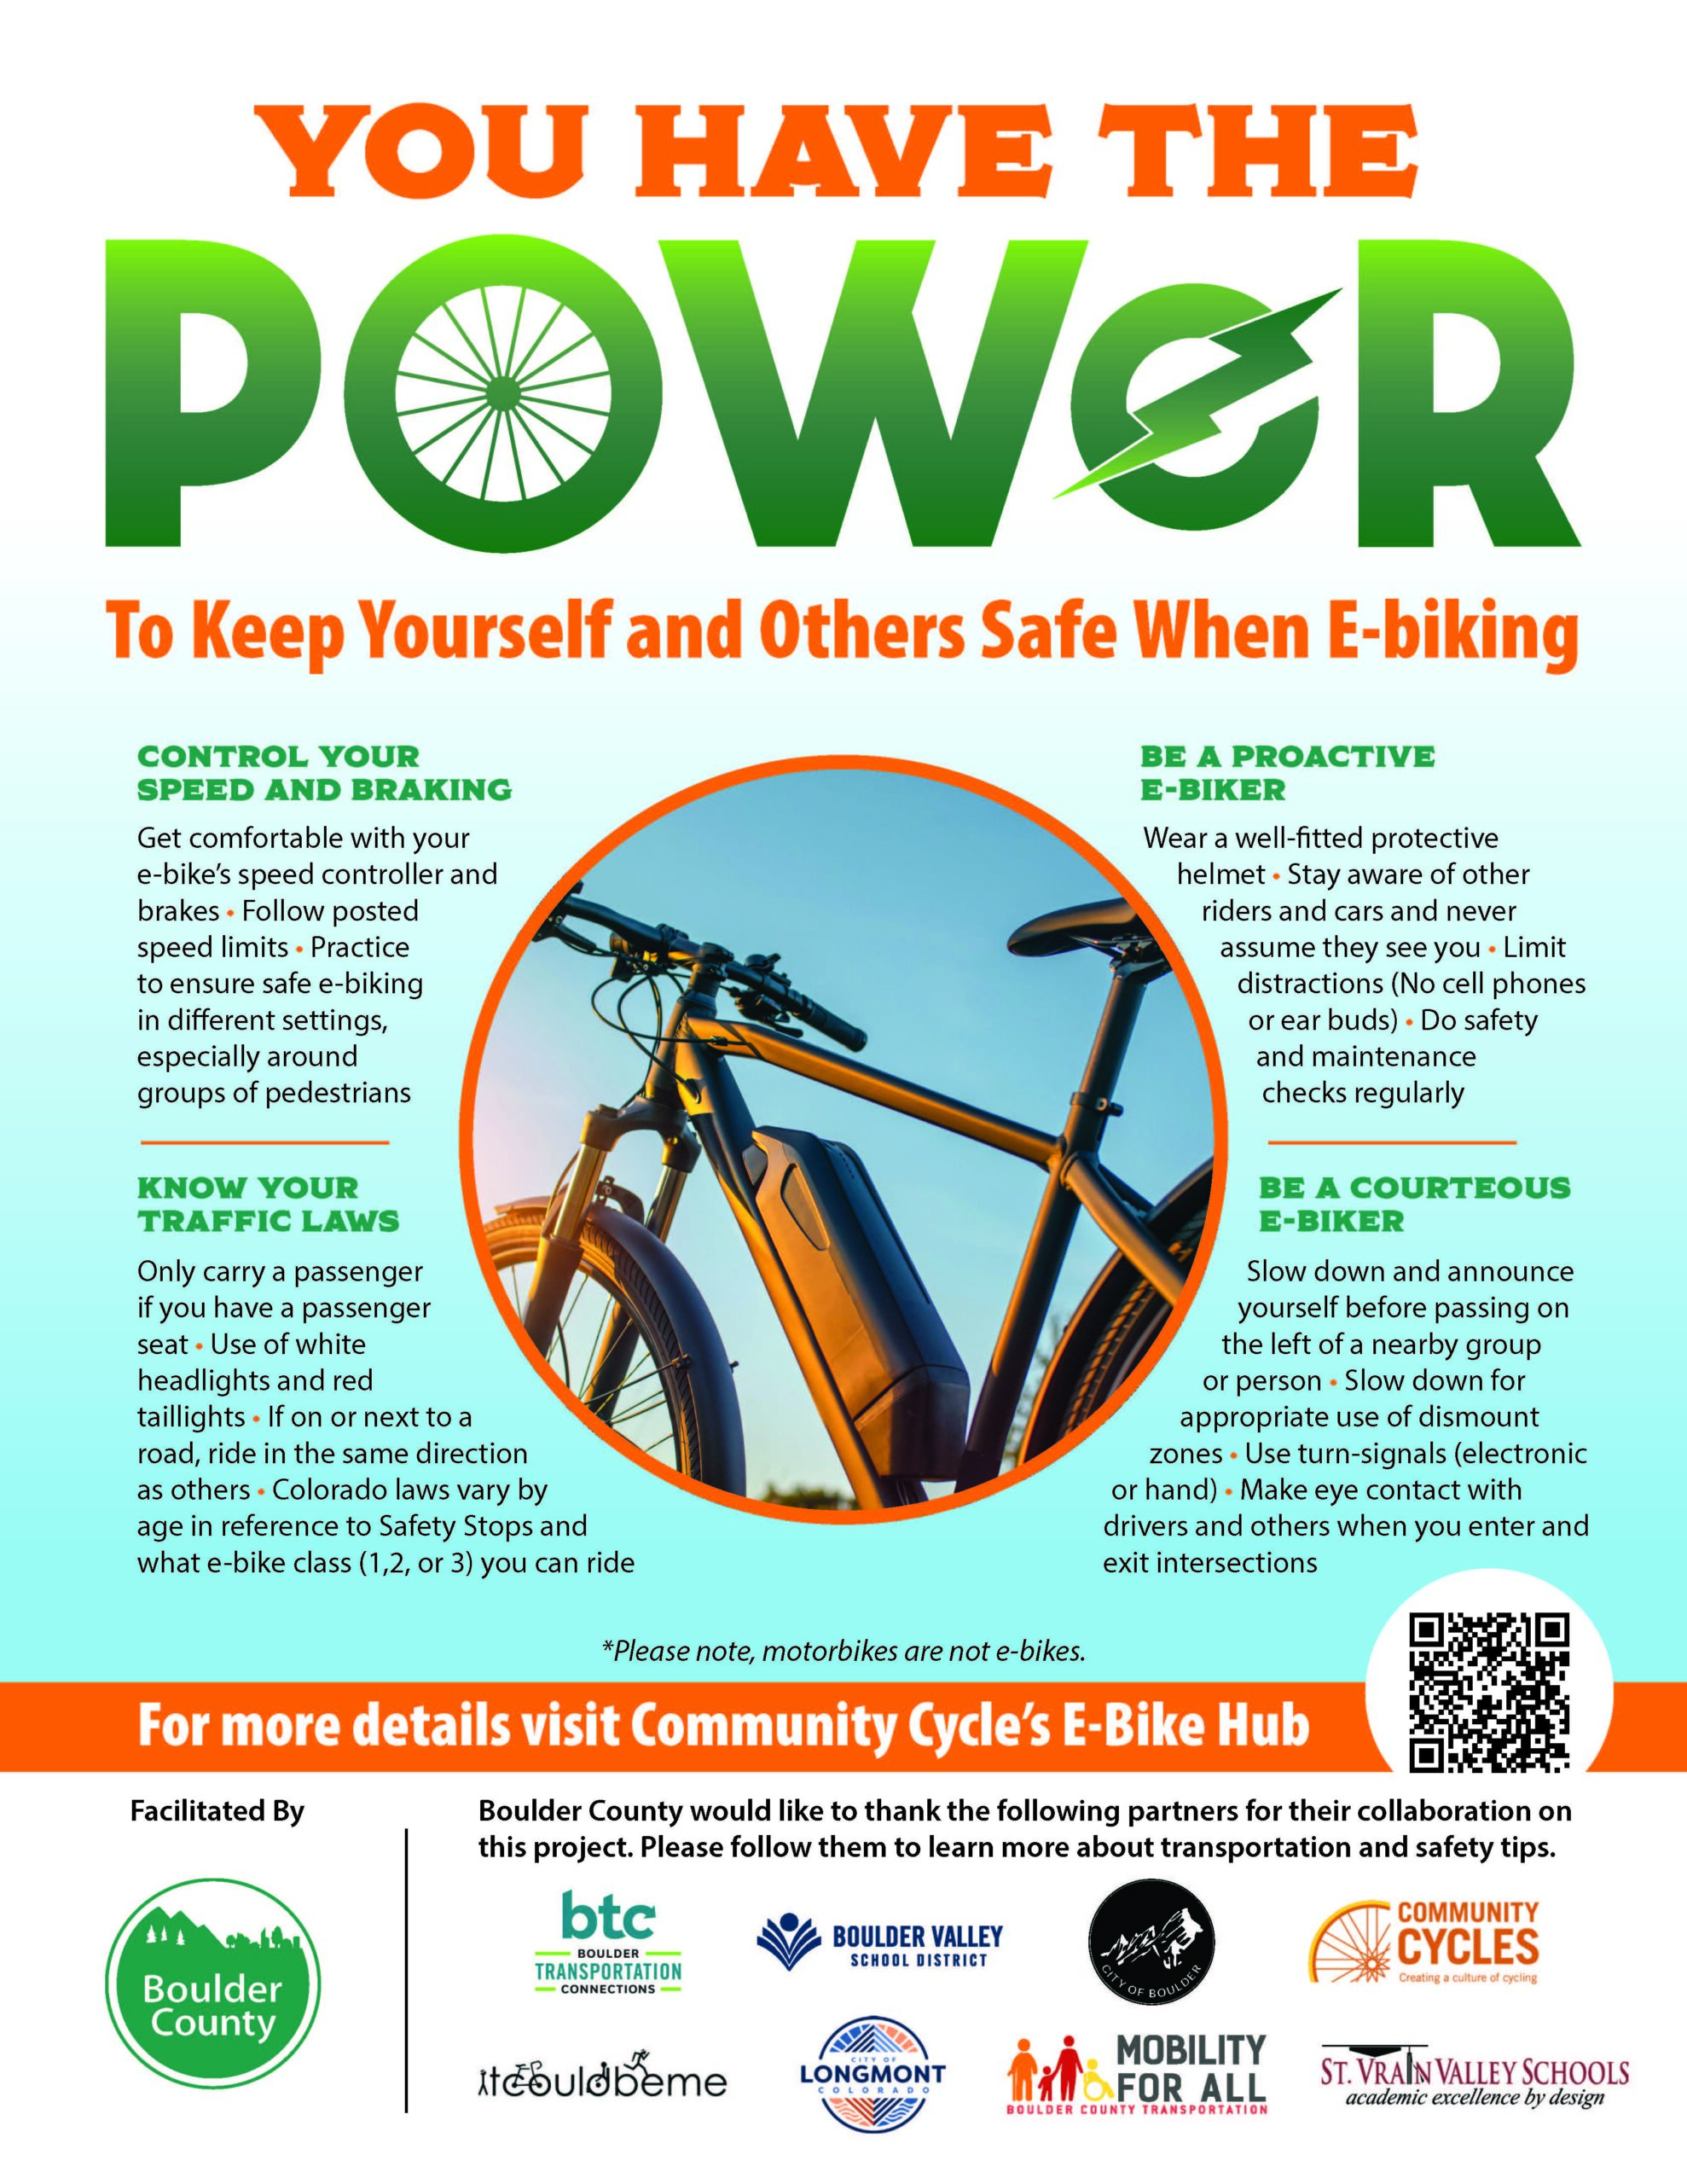 A poster illustrating the ways an e-bike rider practice safe riding